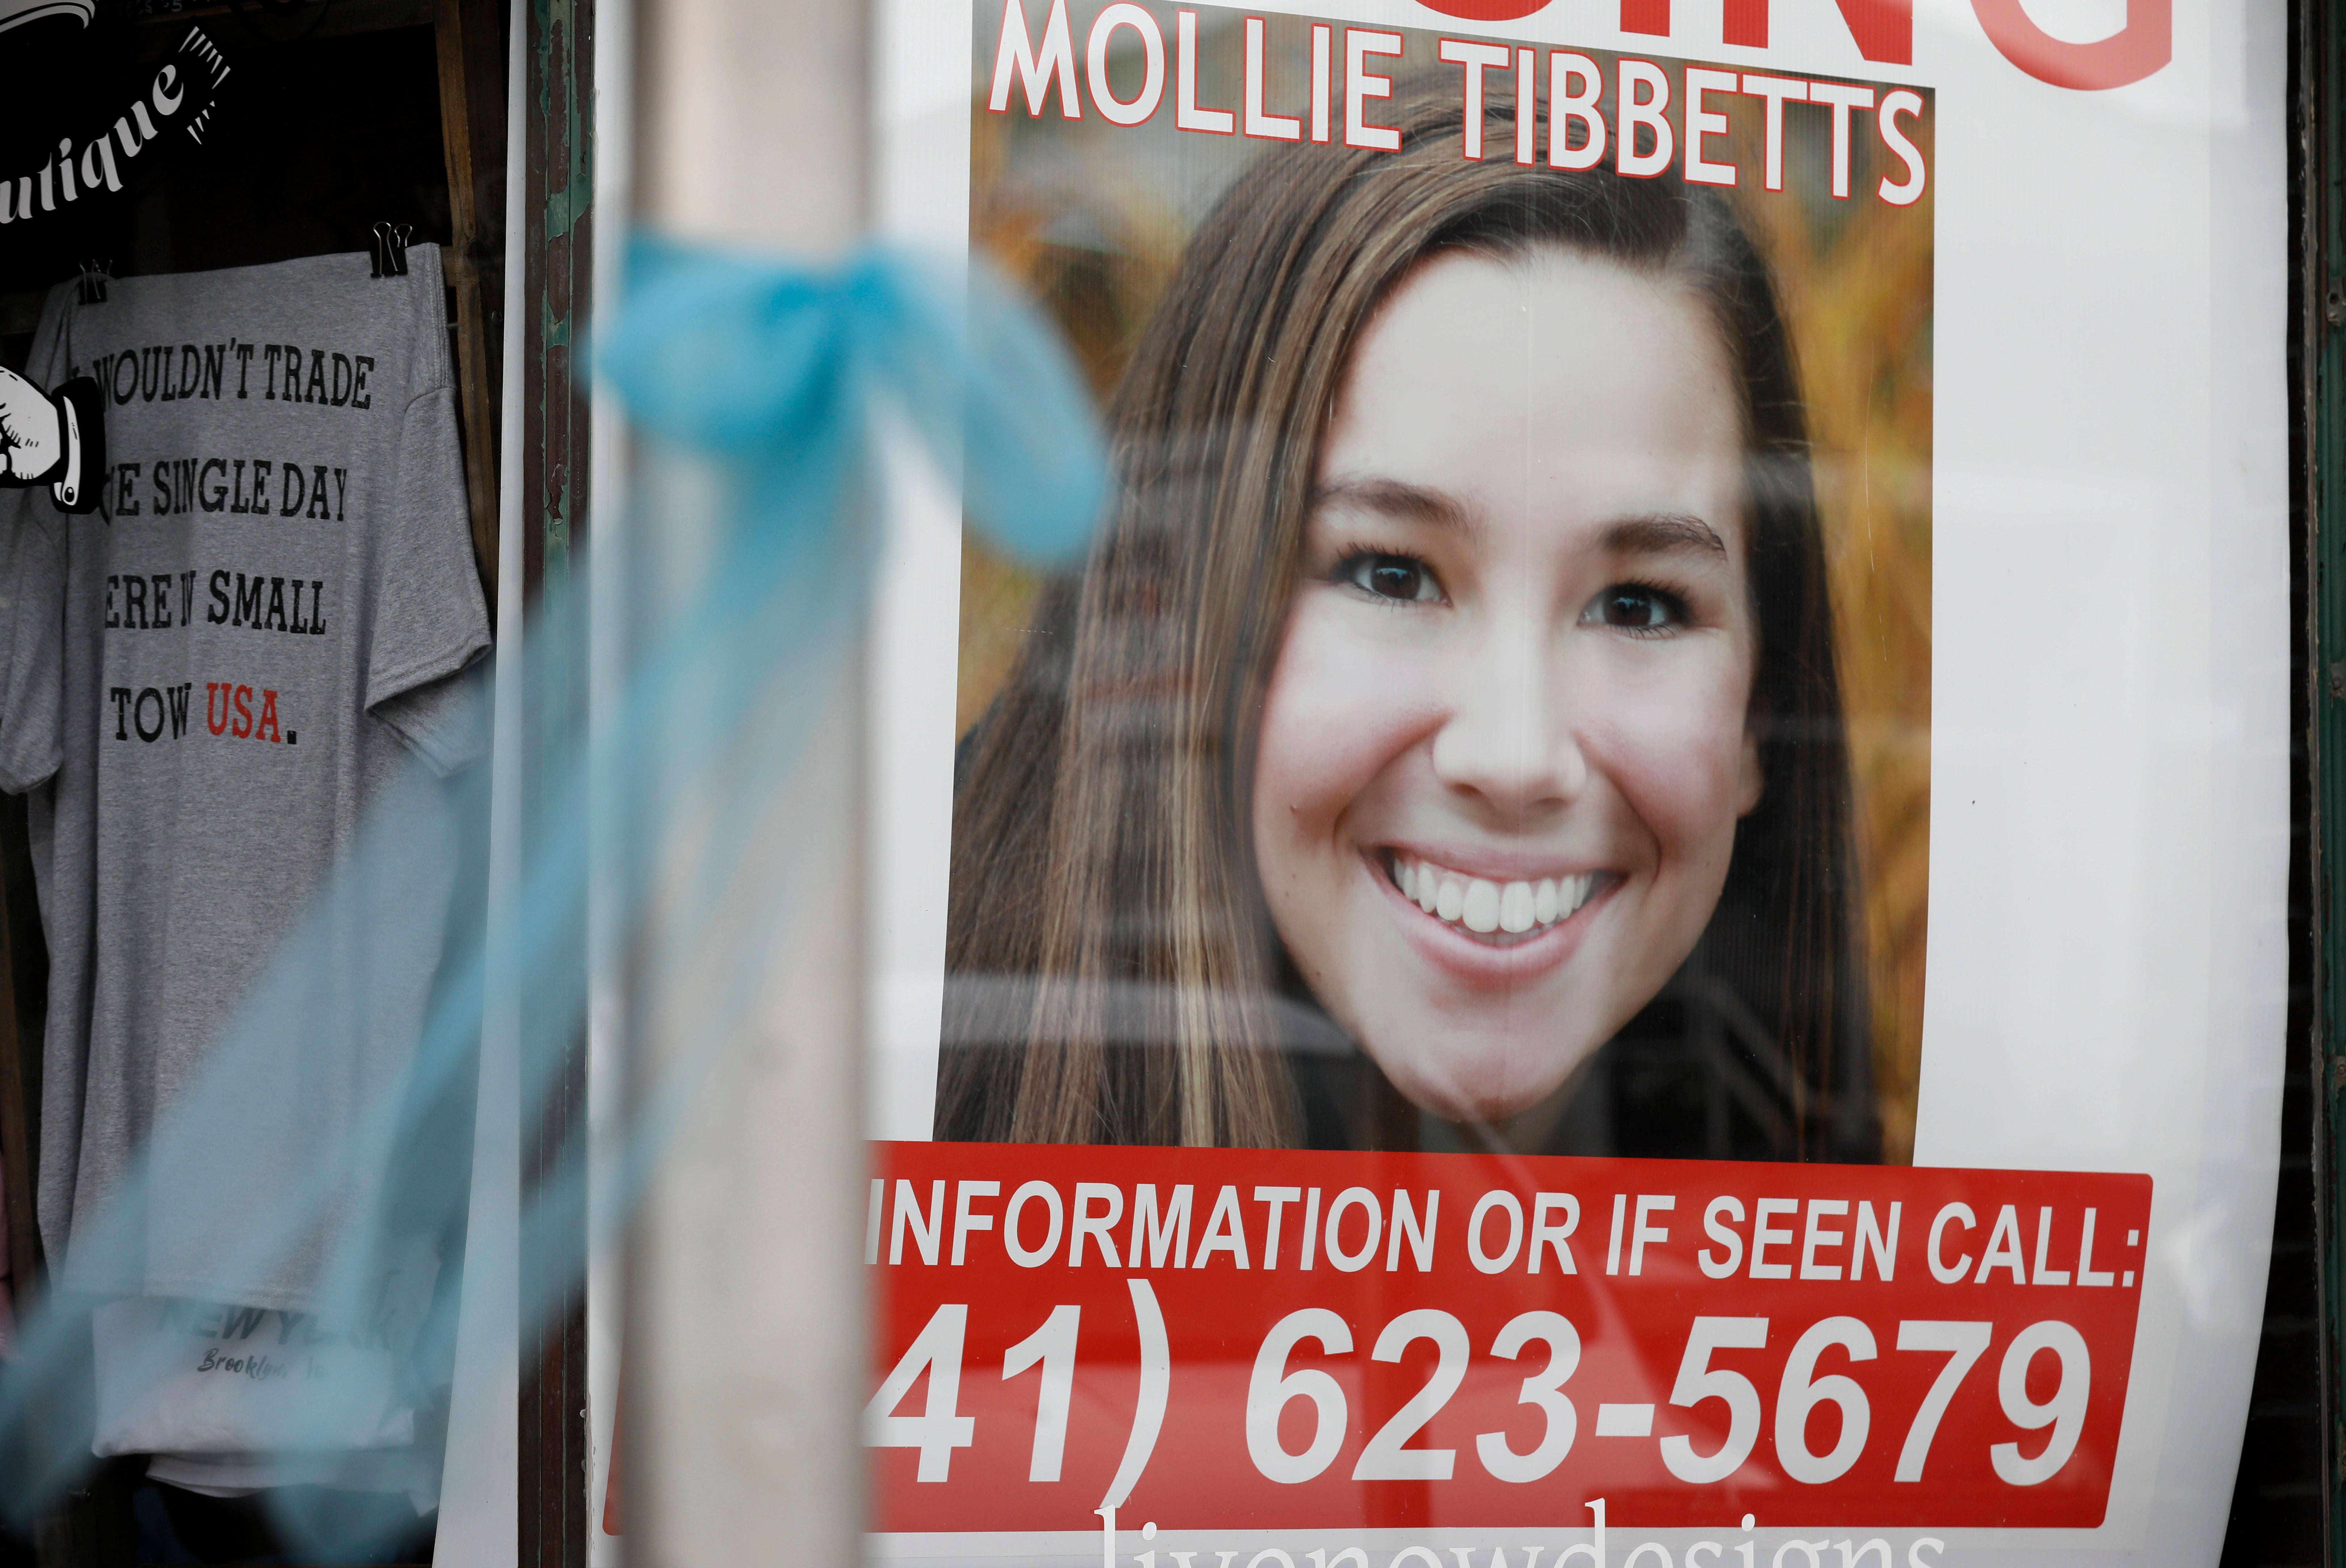 The judge has delayed sentencing a man convicted in the murder of Mollie Tibbetts